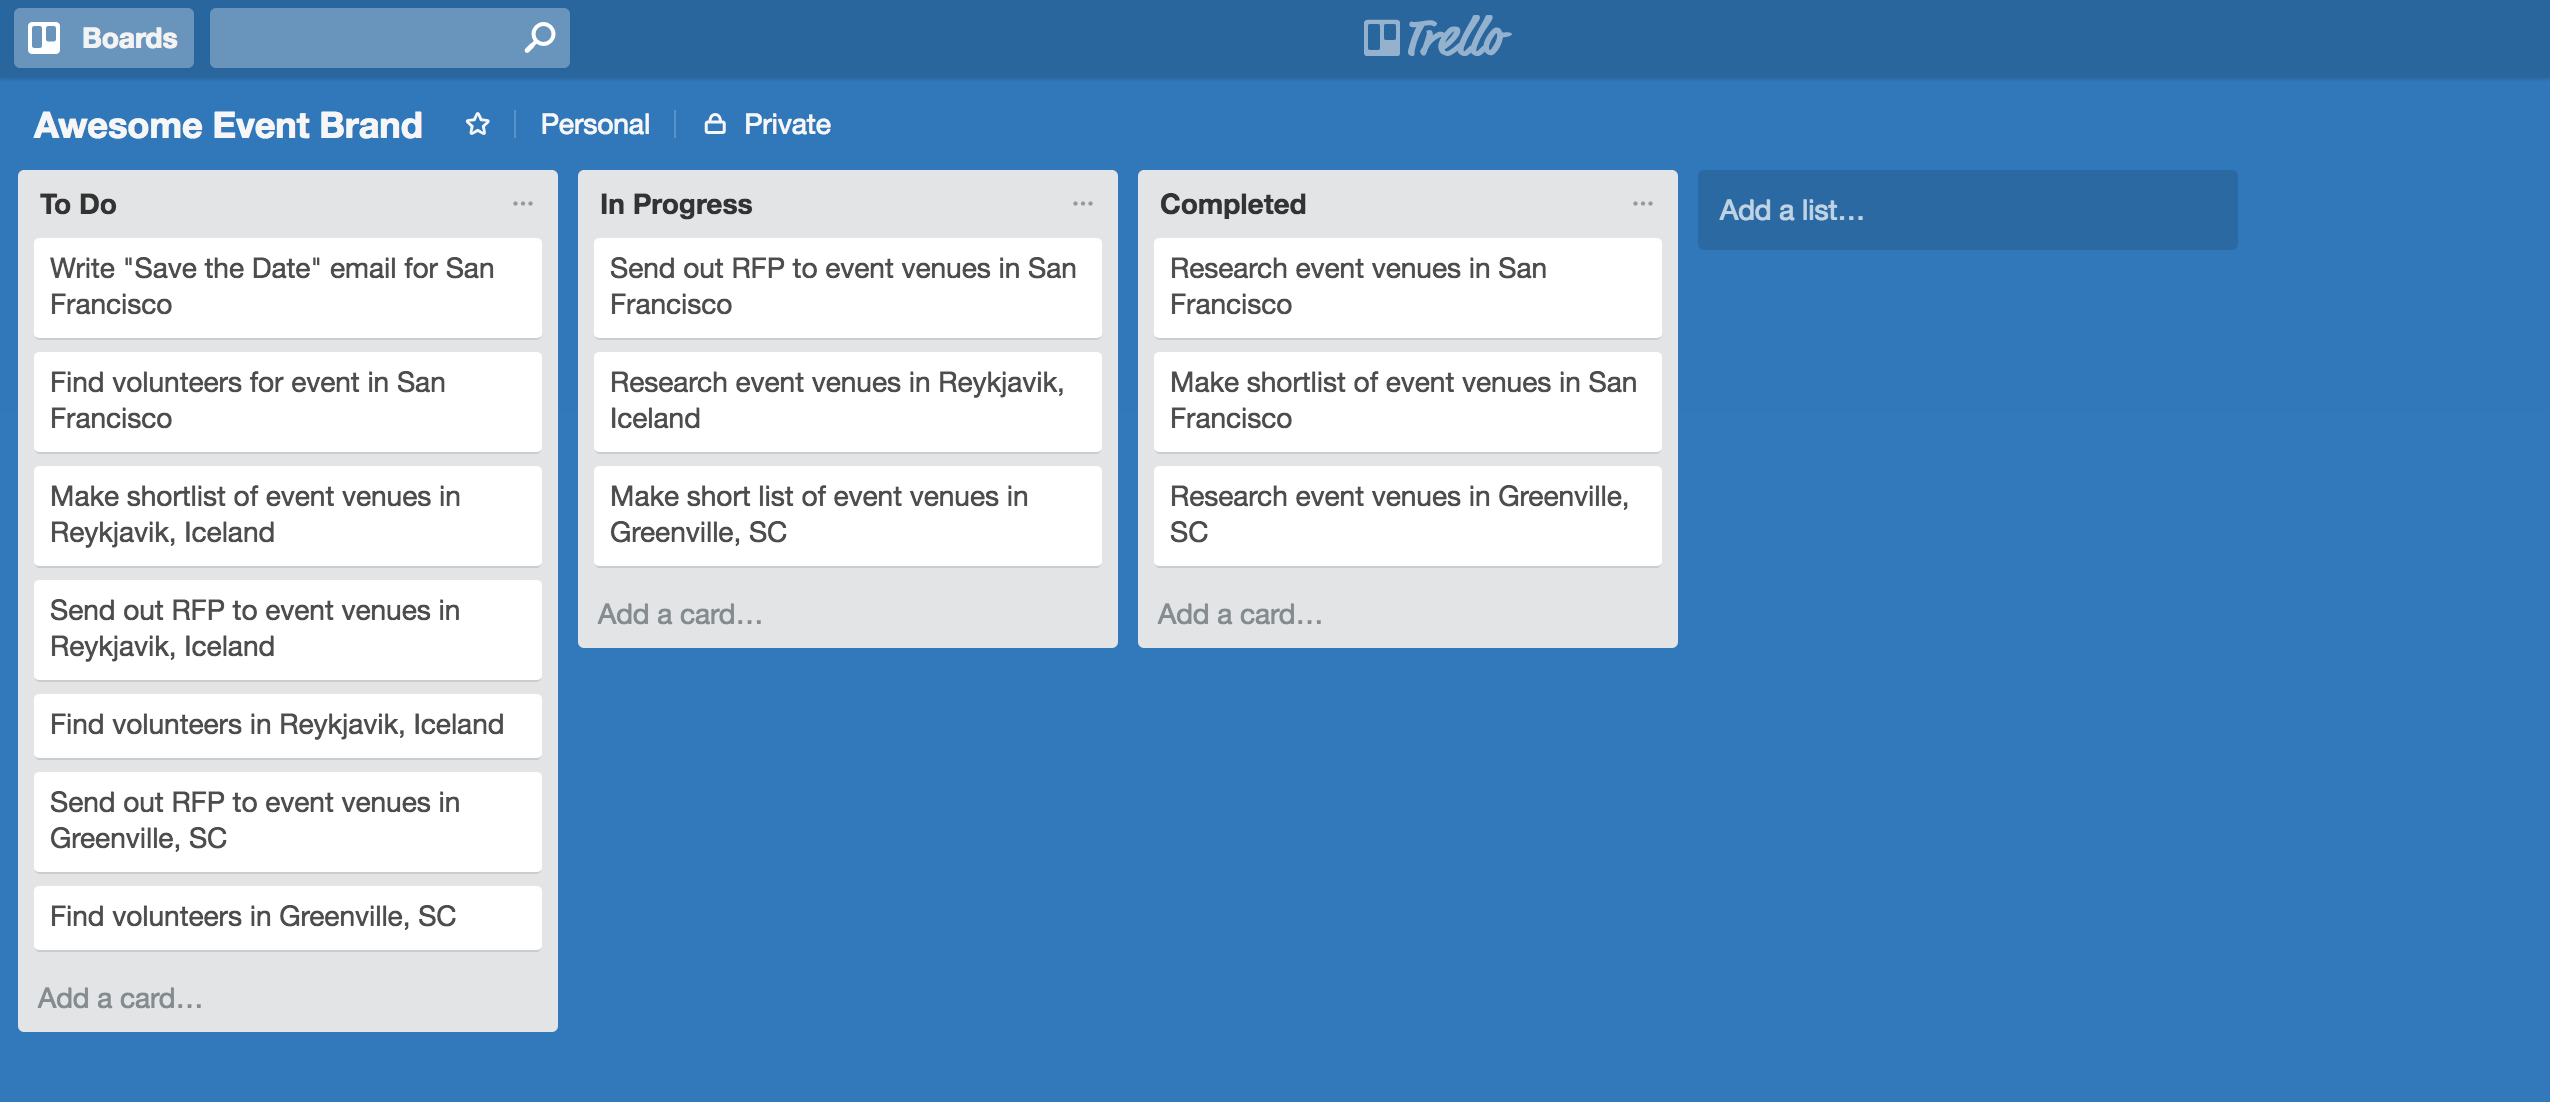 sample trello boards for project management